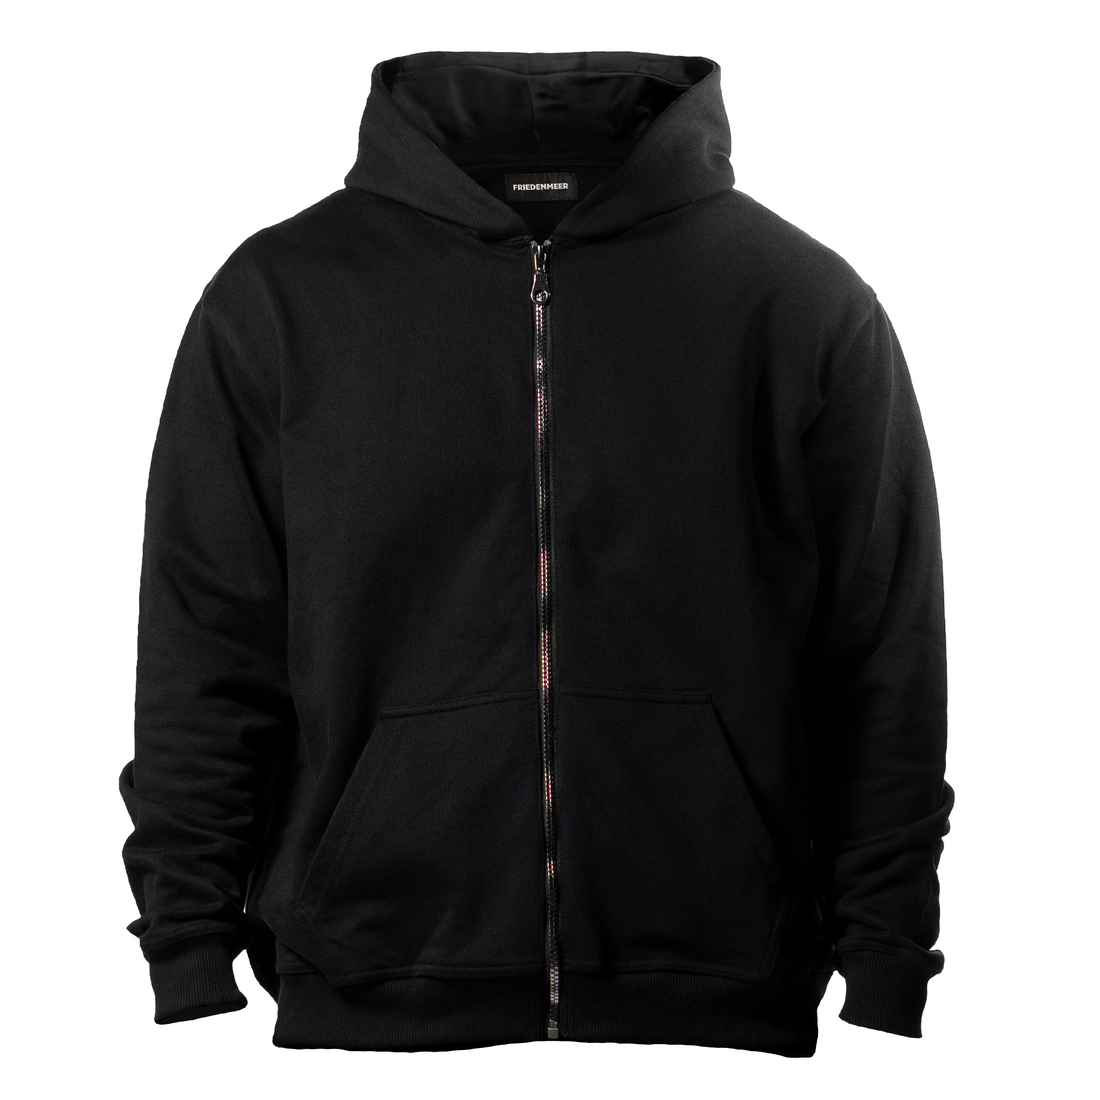 Black high quality oversized luxury zip up hoodie from the luxury brand FRIEDENMEER